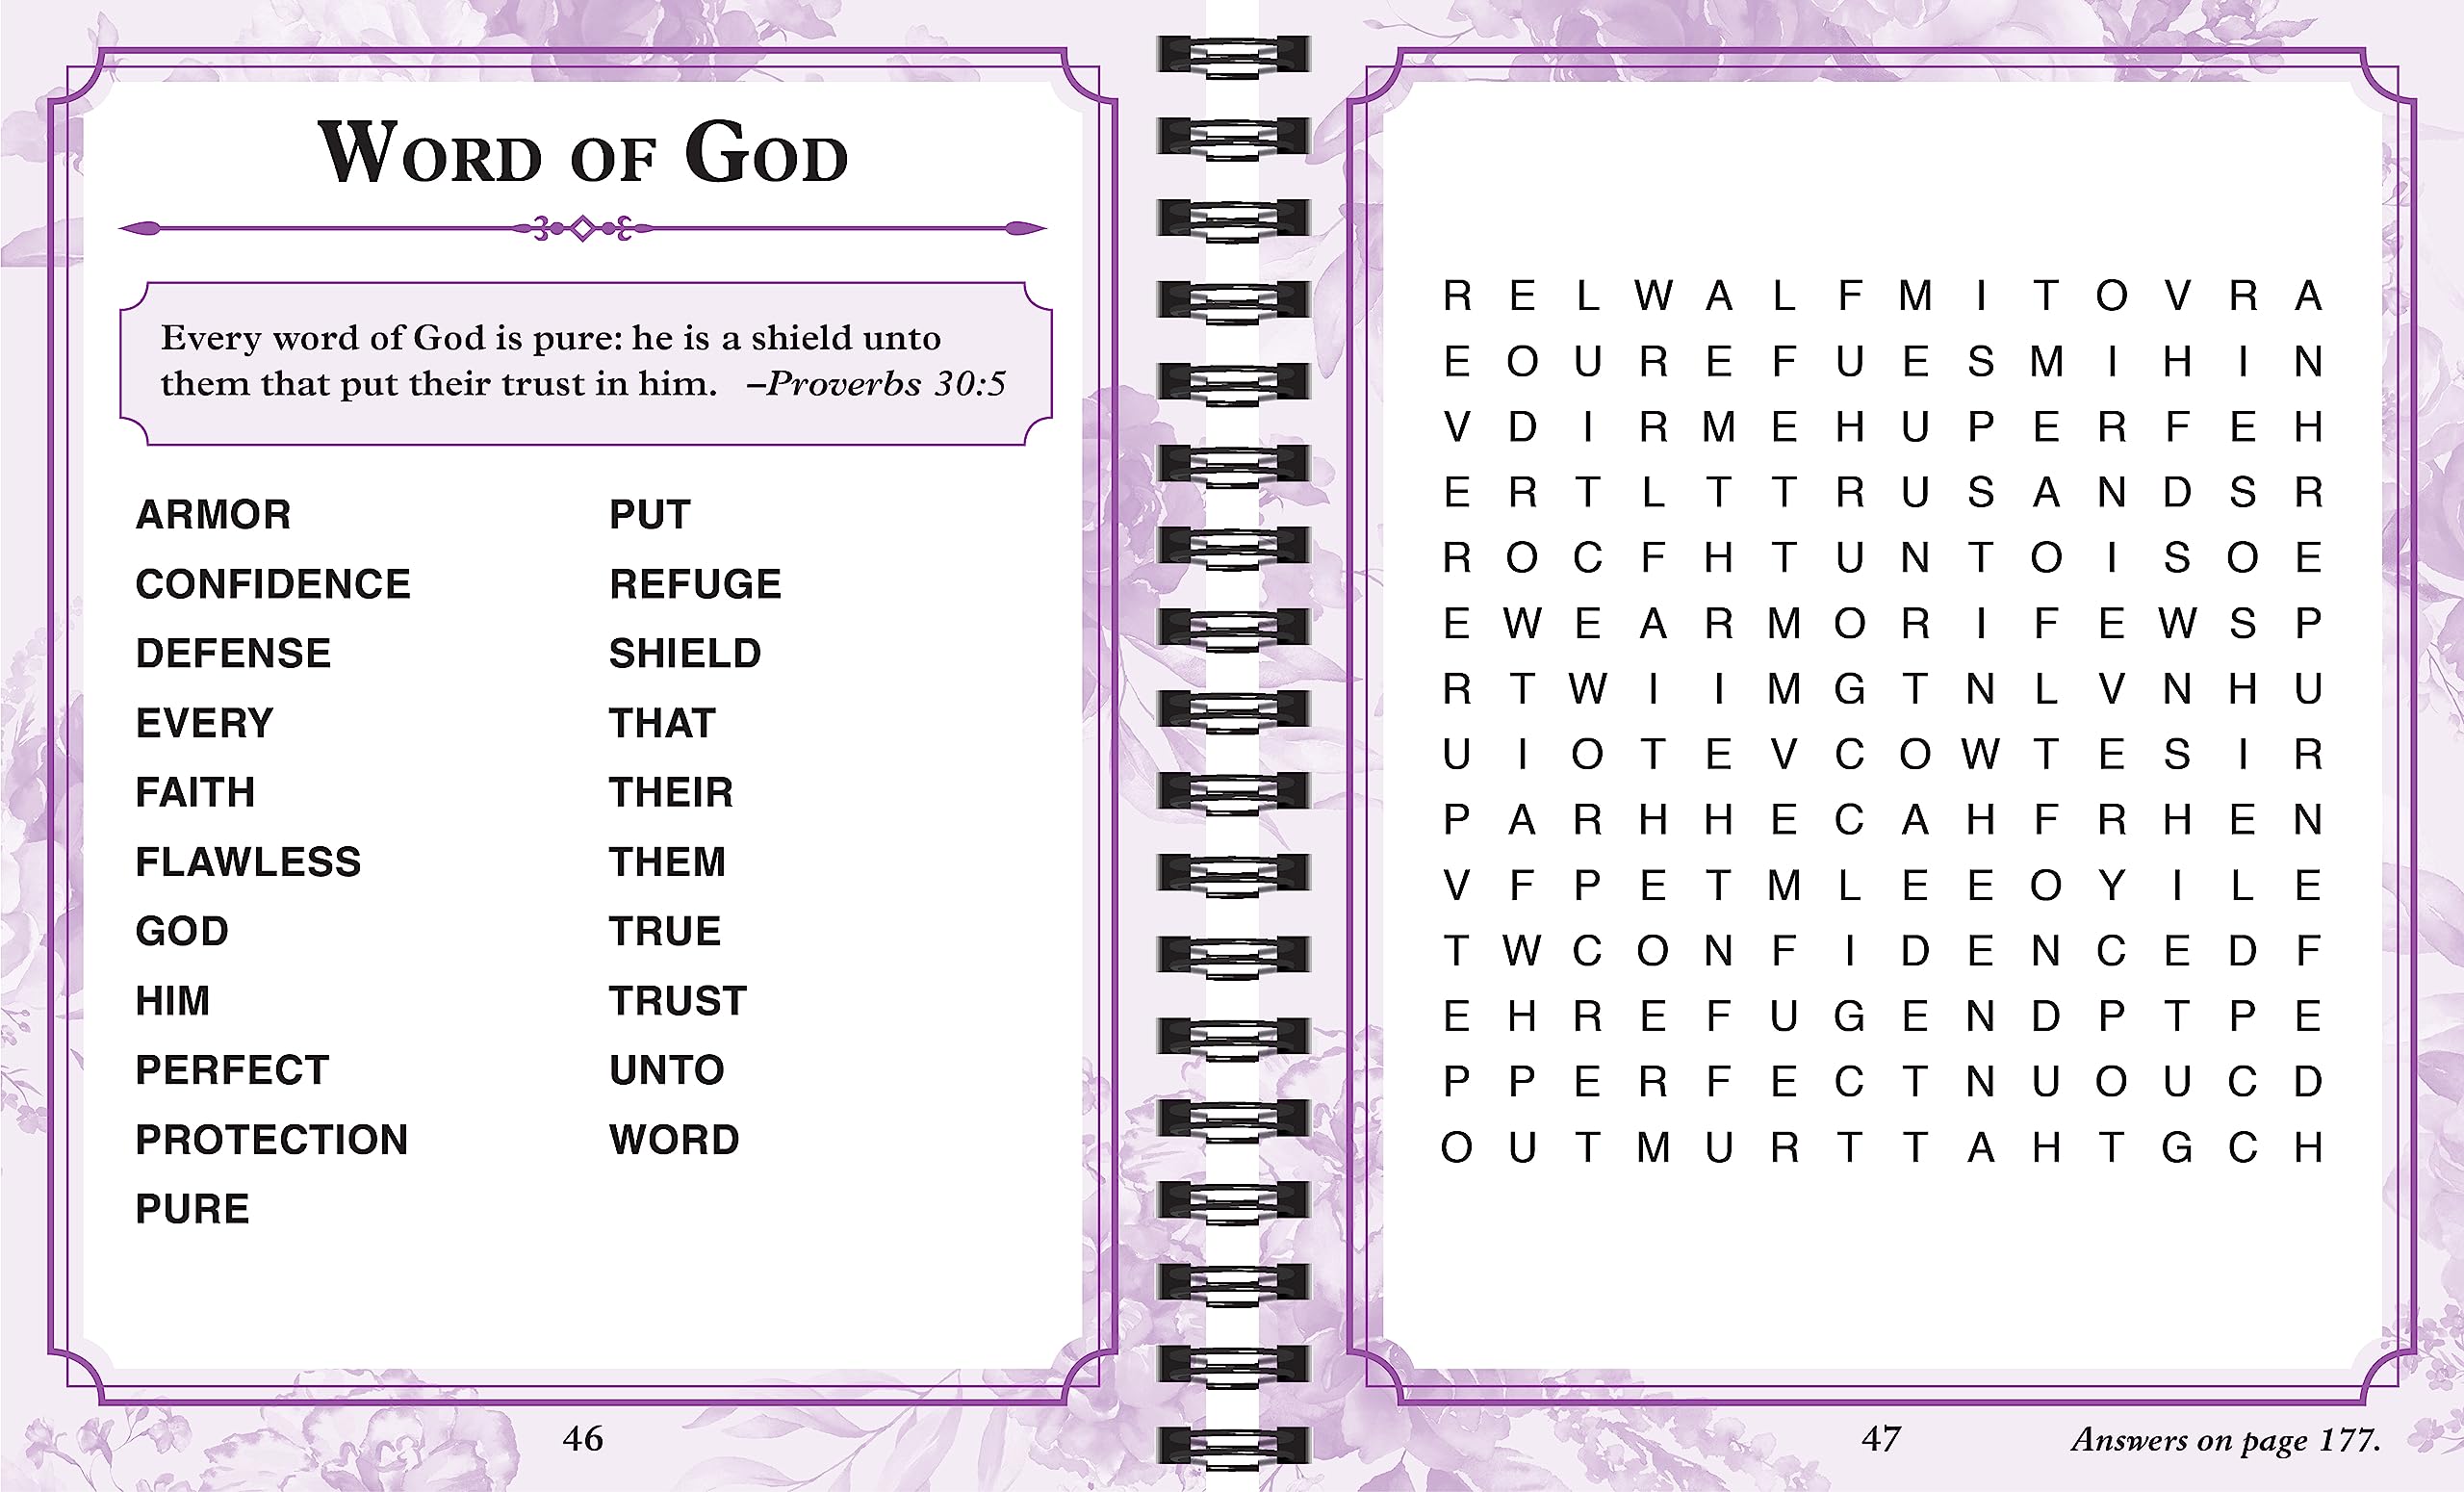 Brain Games - Bible Word Search: Wisdom of Proverbs Large Print